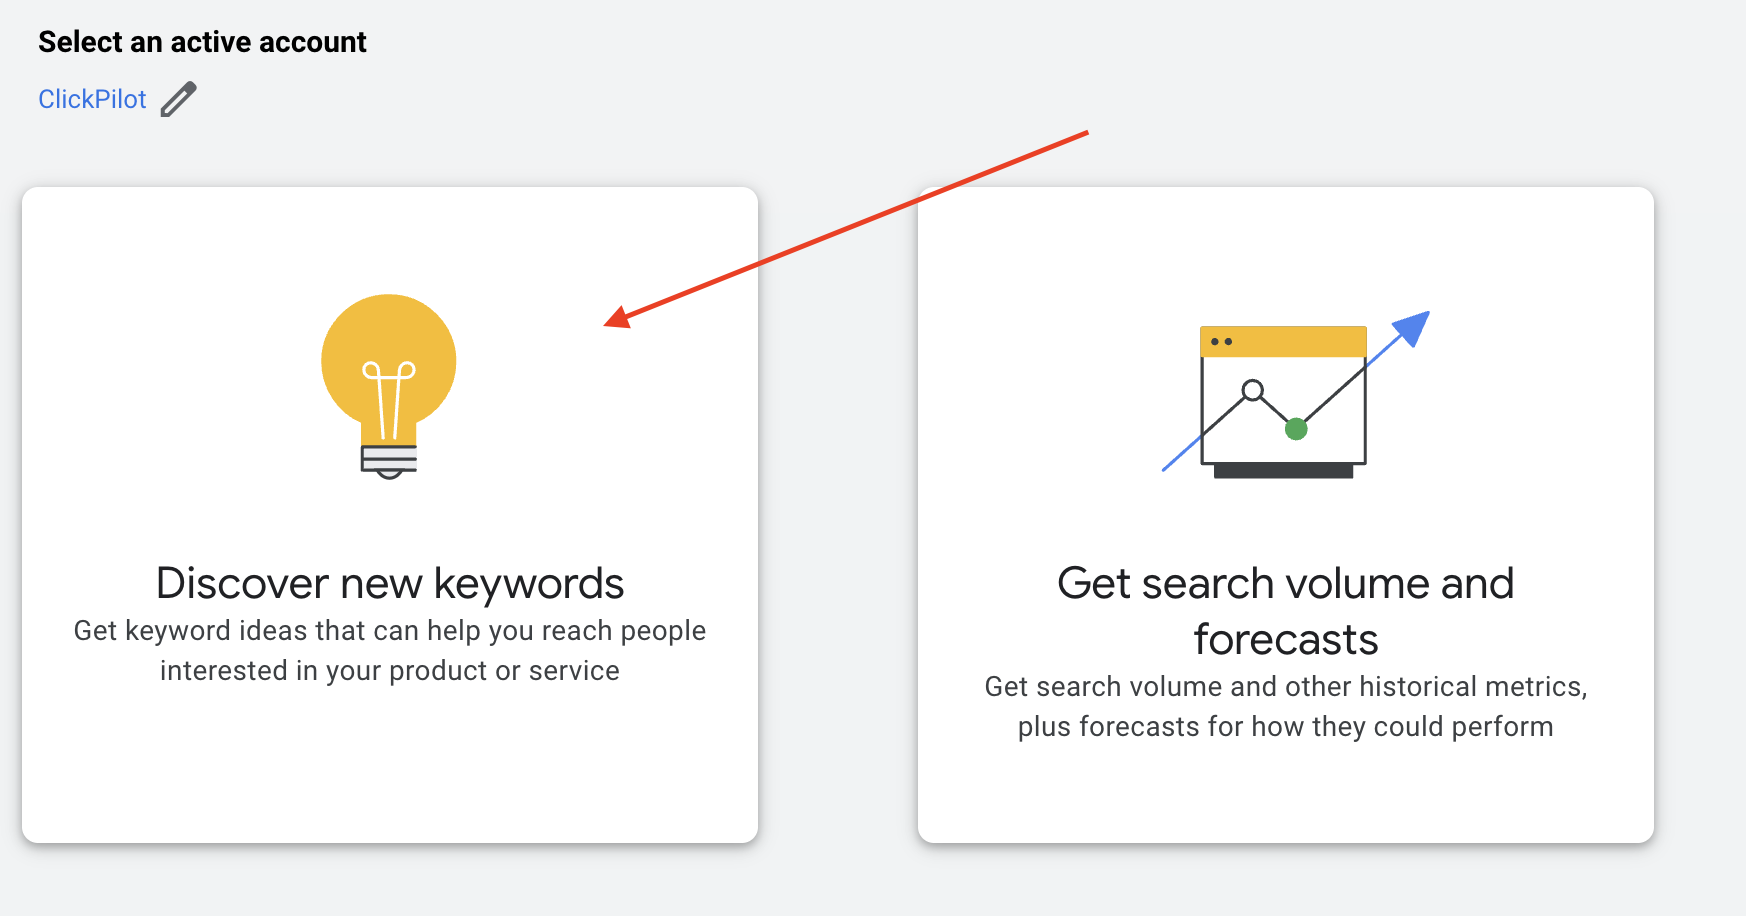 Screen grab annotation to indicate where to start your keyword research in Google keyword planner &amp;amp;amp;amp;amp;amp;amp;amp;amp;amp;amp;amp;amp;amp;amp;amp;amp;amp;amp;amp;amp;amp;amp;amp;amp;amp;amp;amp;amp;amp;amp;amp;amp;amp;amp;amp;amp;amp;amp;amp;amp;amp;amp;amp;amp;amp;amp;amp;amp;amp;amp;amp;amp;amp;amp;amp;amp;amp;amp;amp;amp;amp;amp;amp;amp;amp;amp;amp;amp;amp;amp;amp;amp;gt; Discover new keywords